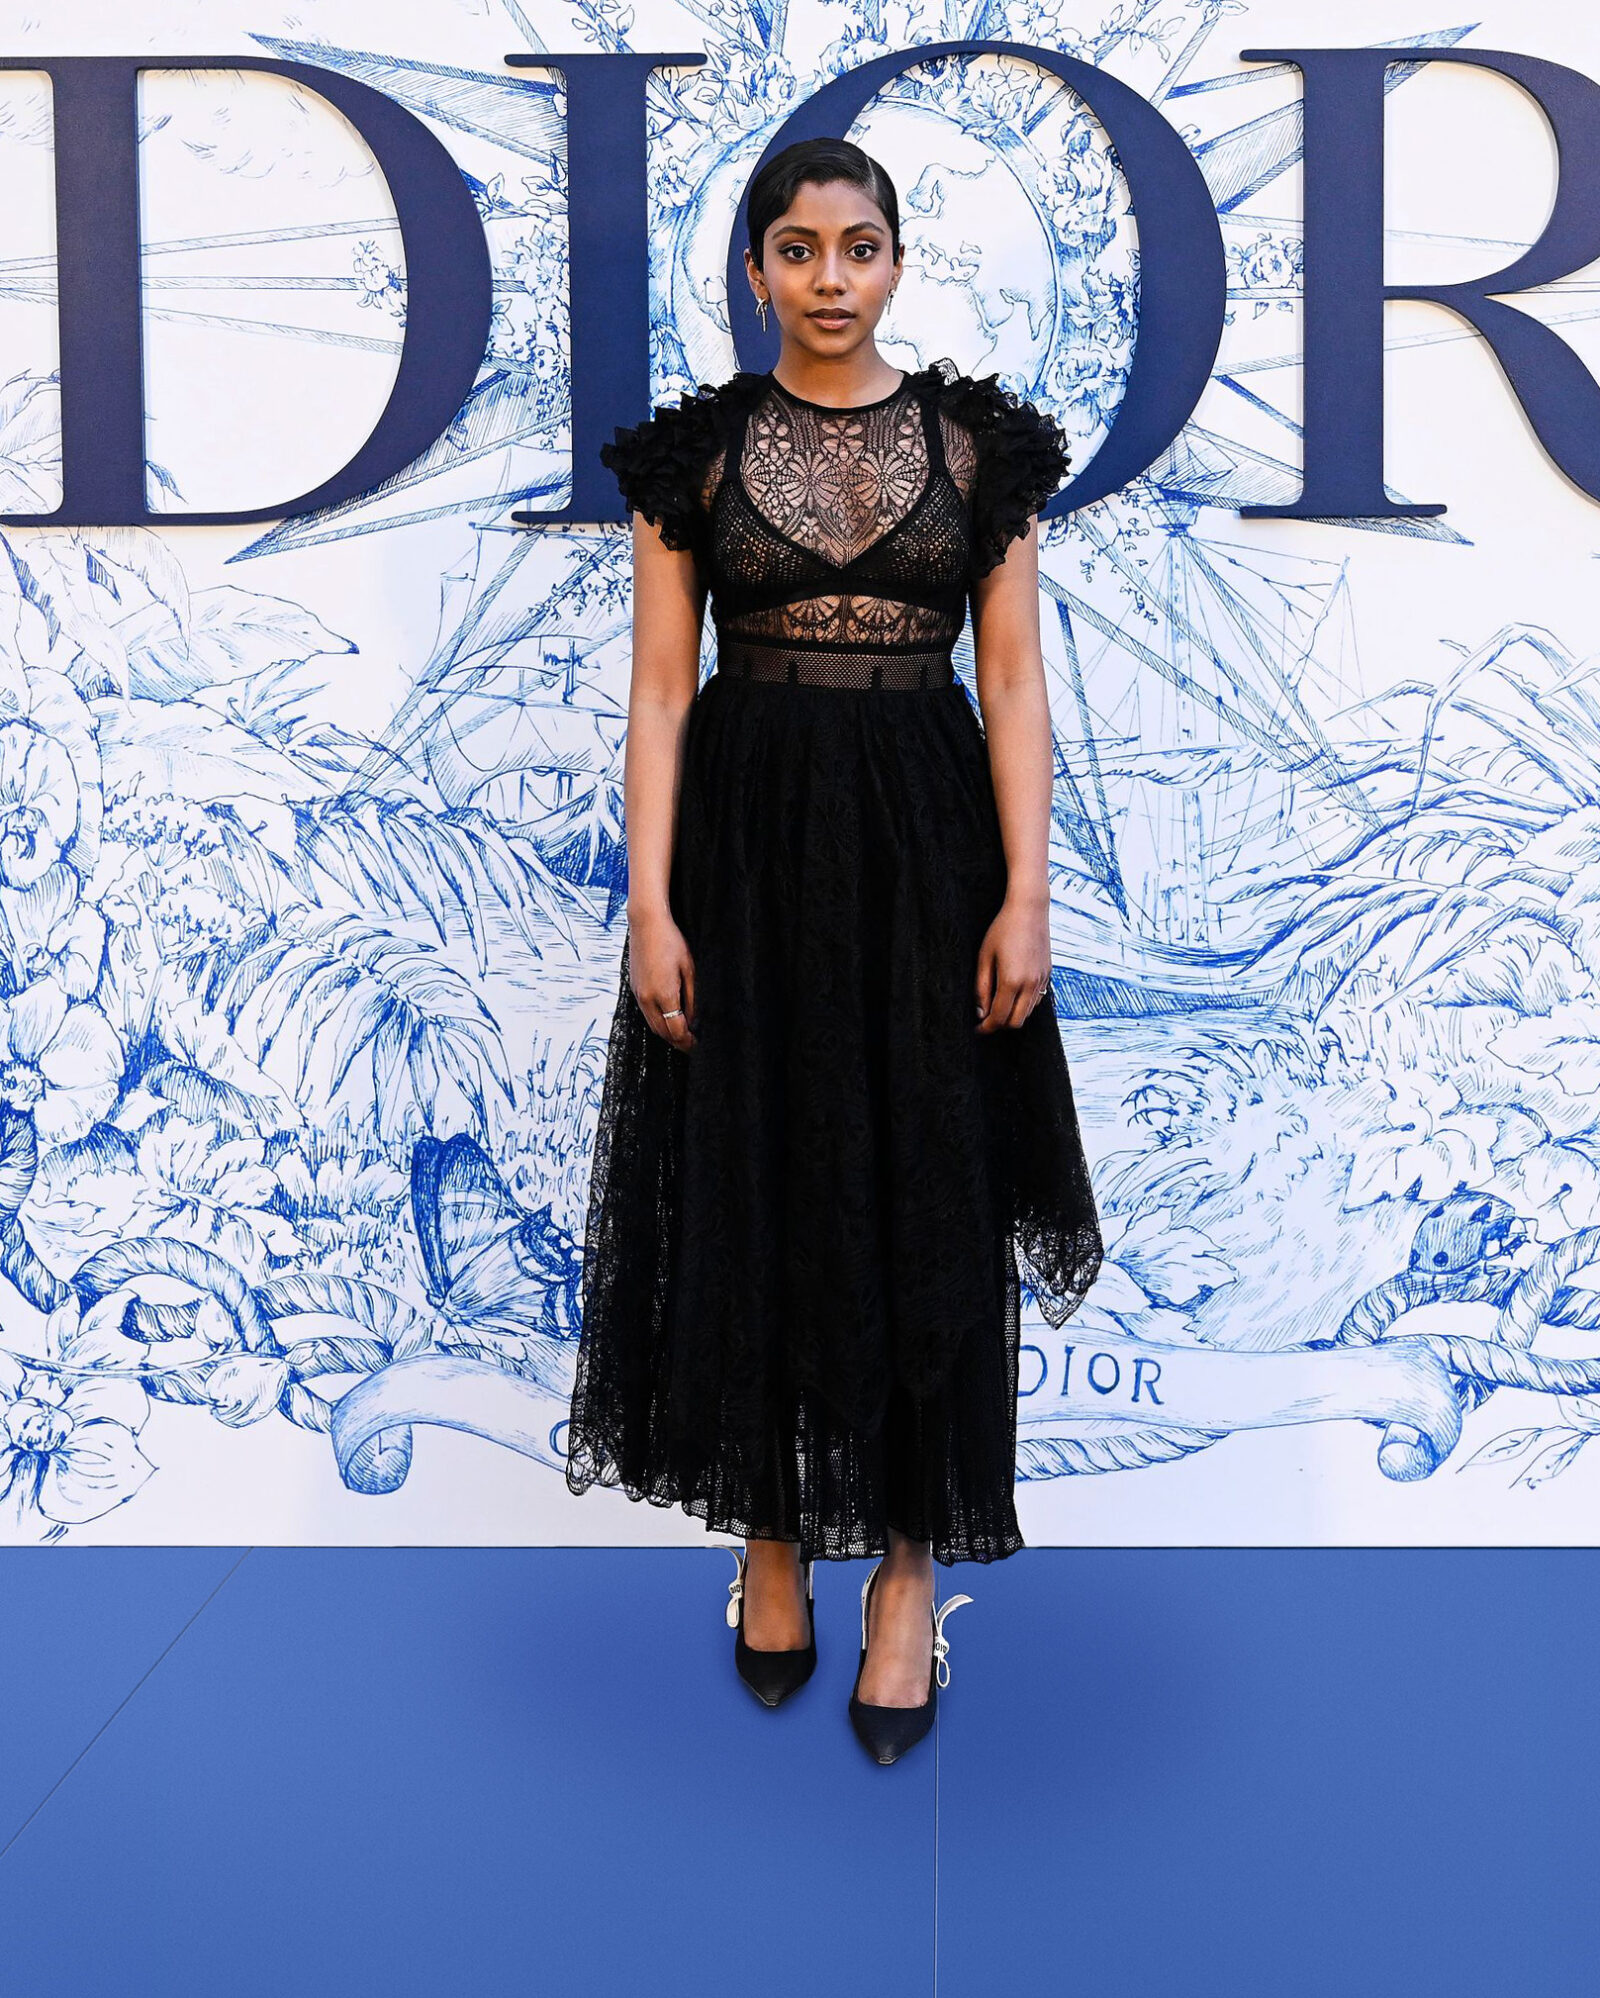 SEVILLE, SPAIN - JUNE 16: Charithra Chandran attends &quot;Crucero Collection&quot; fashion show presentation by Dior at Plaza de España on June 16, 2022 in Seville, Spain. (Photo by Carlos Alvarez/Getty Images for Dior)